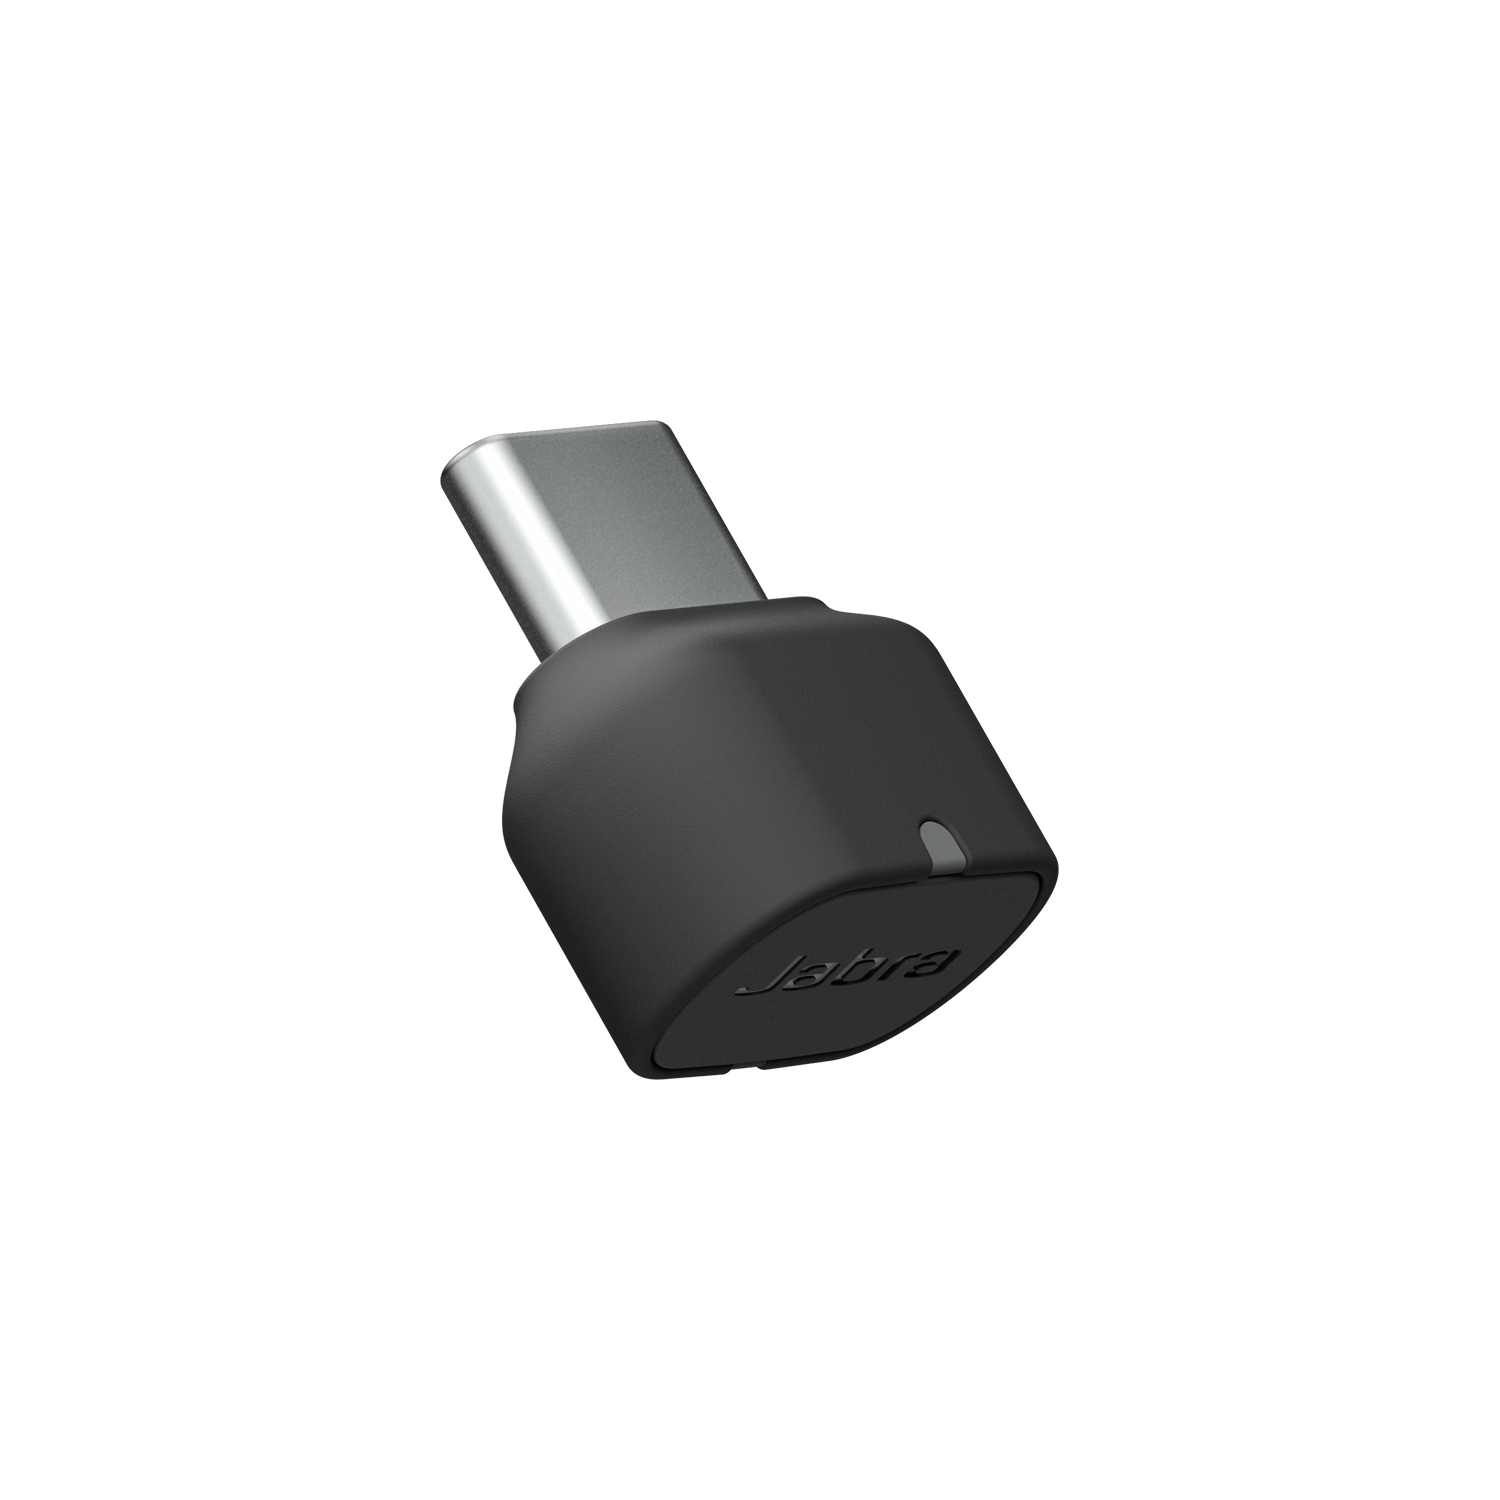 Jabra LINK 380c UC - For Unified Communications - Network Adapter - USB-C - Bluetooth - For Evolve2 65 MS Mono, 65 MS Stereo, 65 UC Mono, 65 UC Stereo, 85 MS Stereo, 85 UC Stereo 14208-25 - C2000